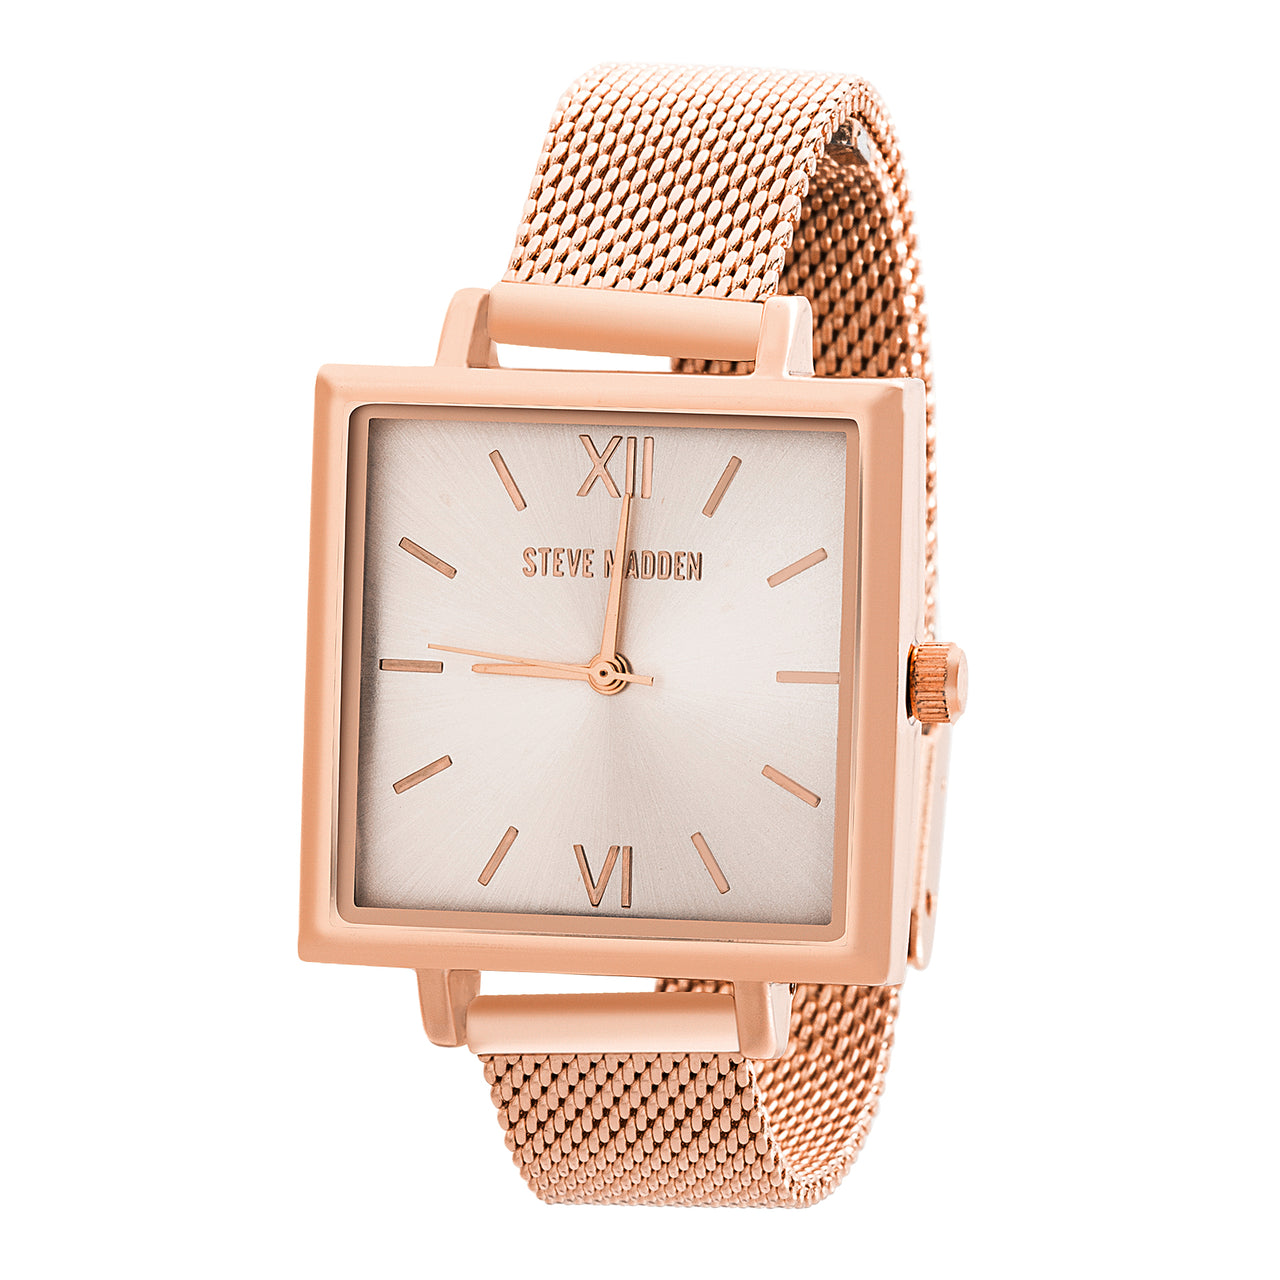 Steve Madden Rose Square Roman Numeral Mesh Band Watch for Women